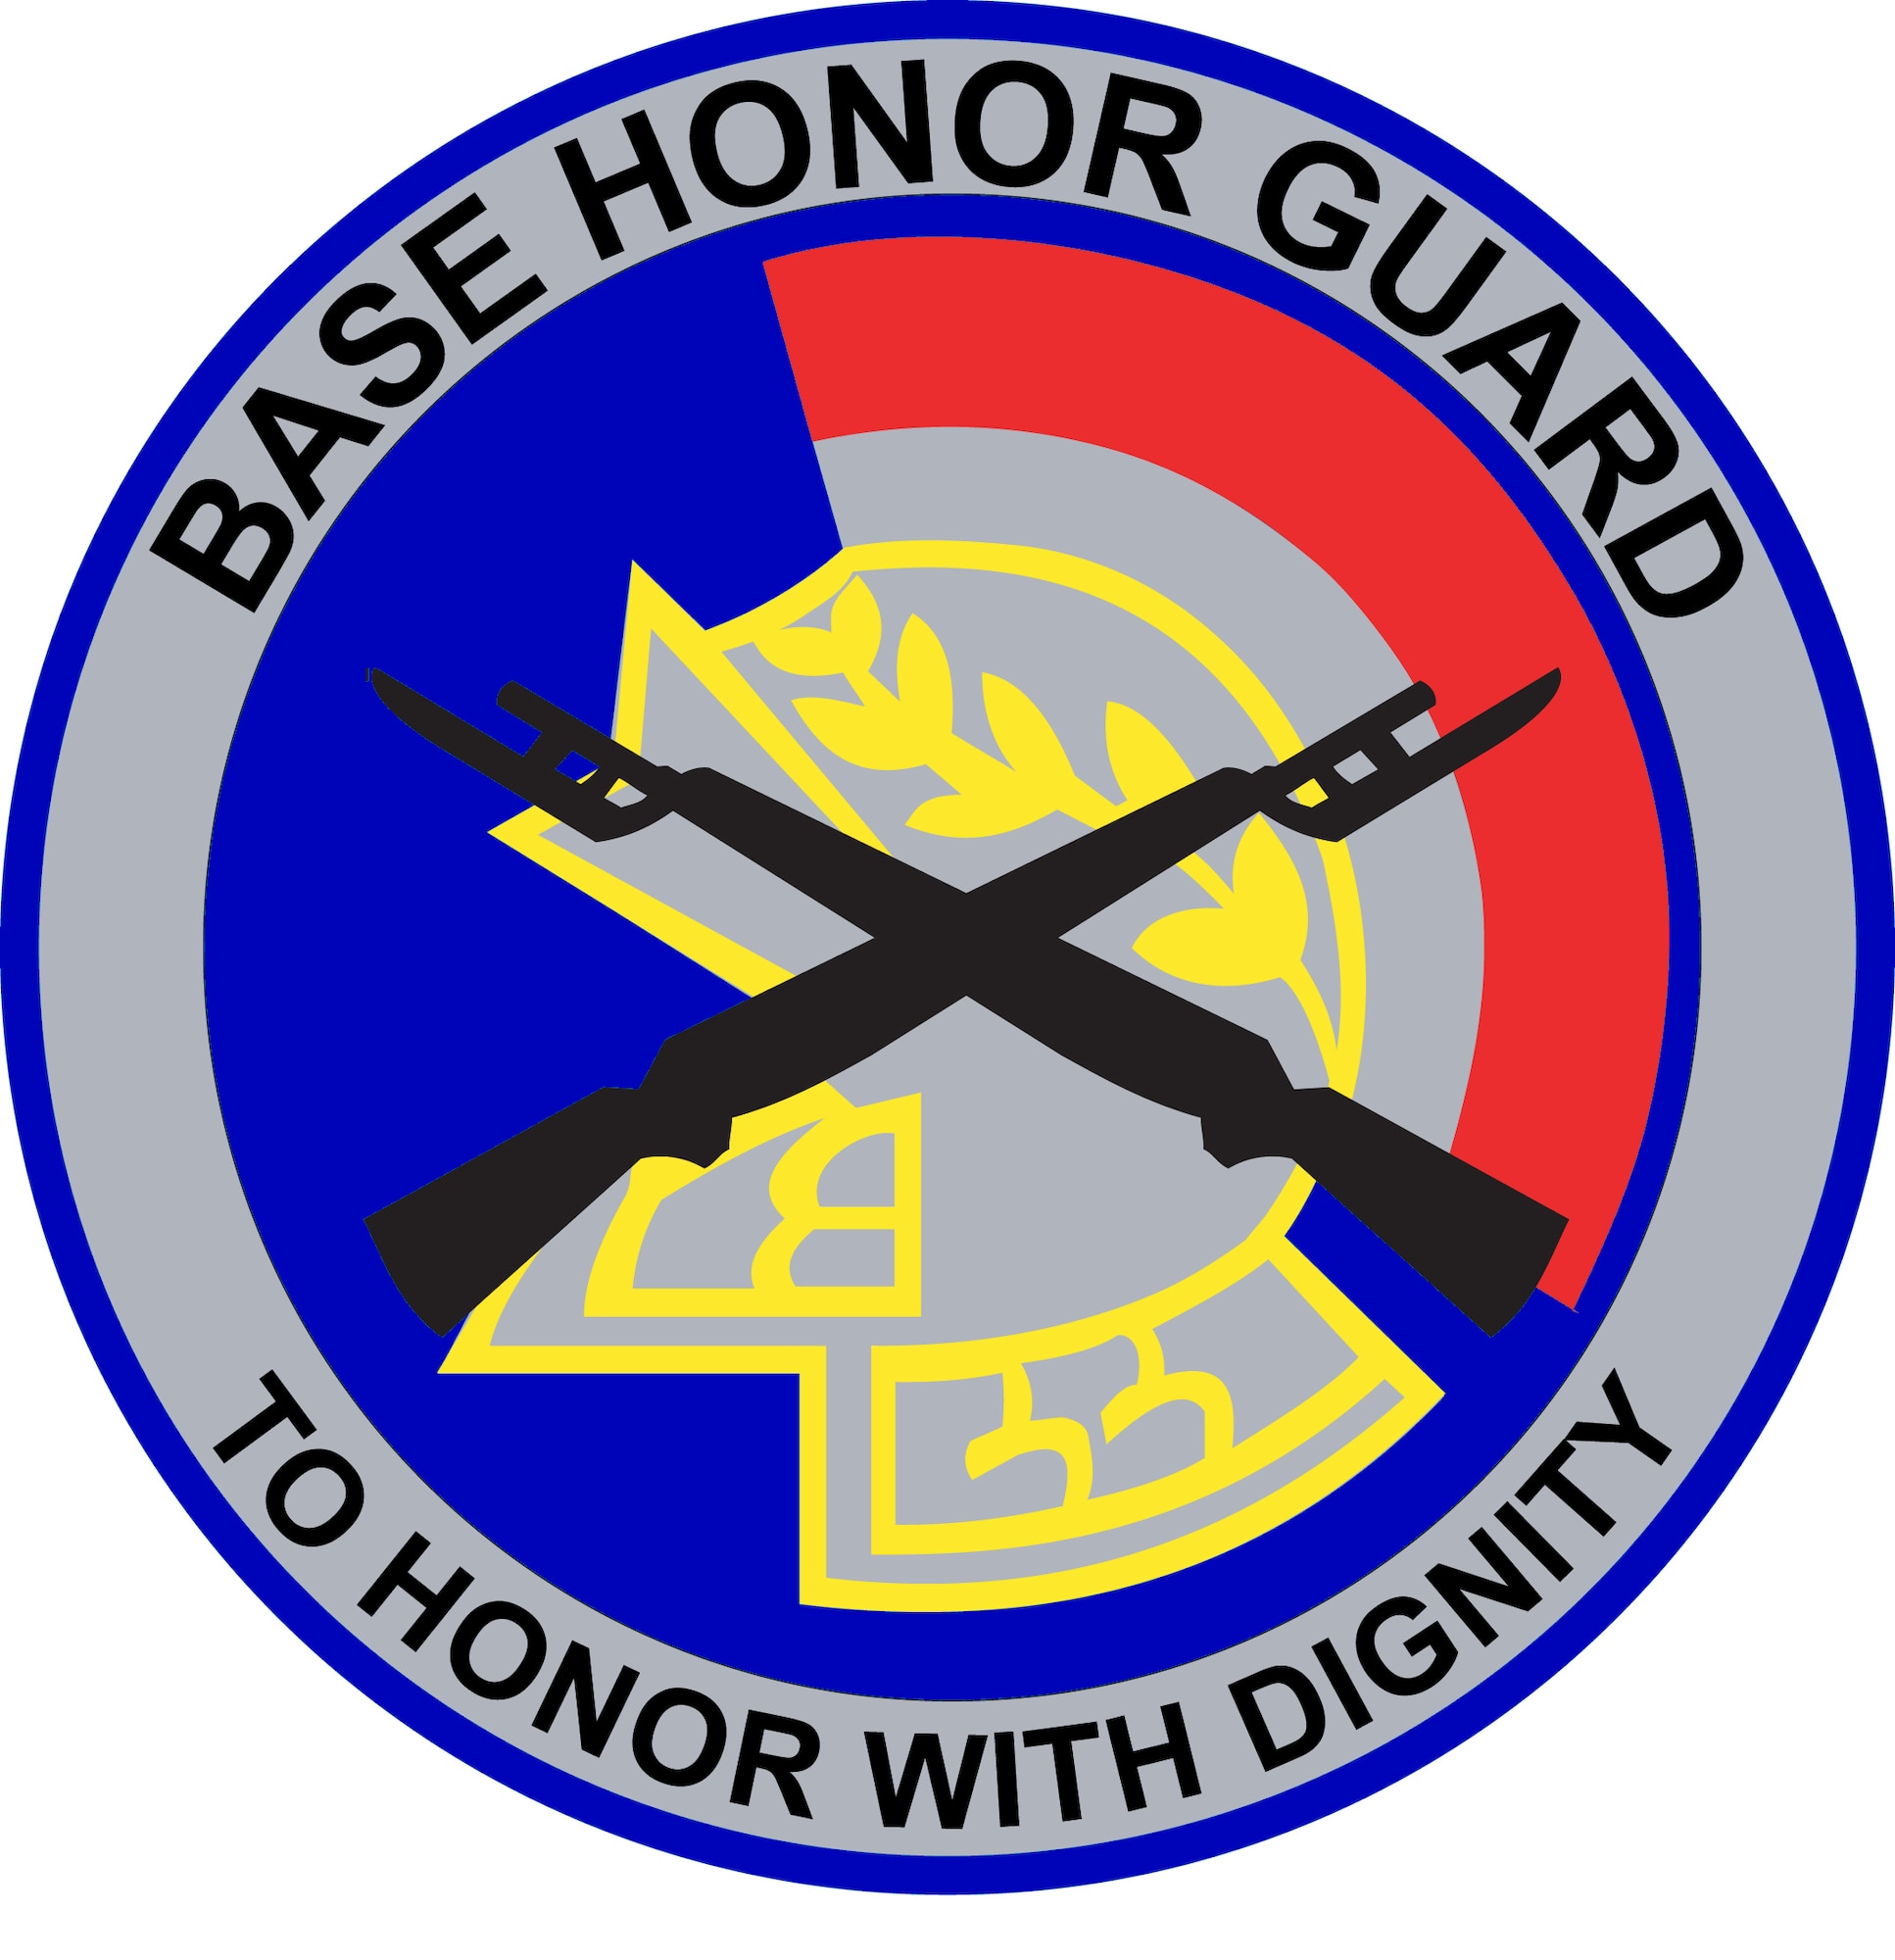 Base Honor Guard. To Honor With Dignity